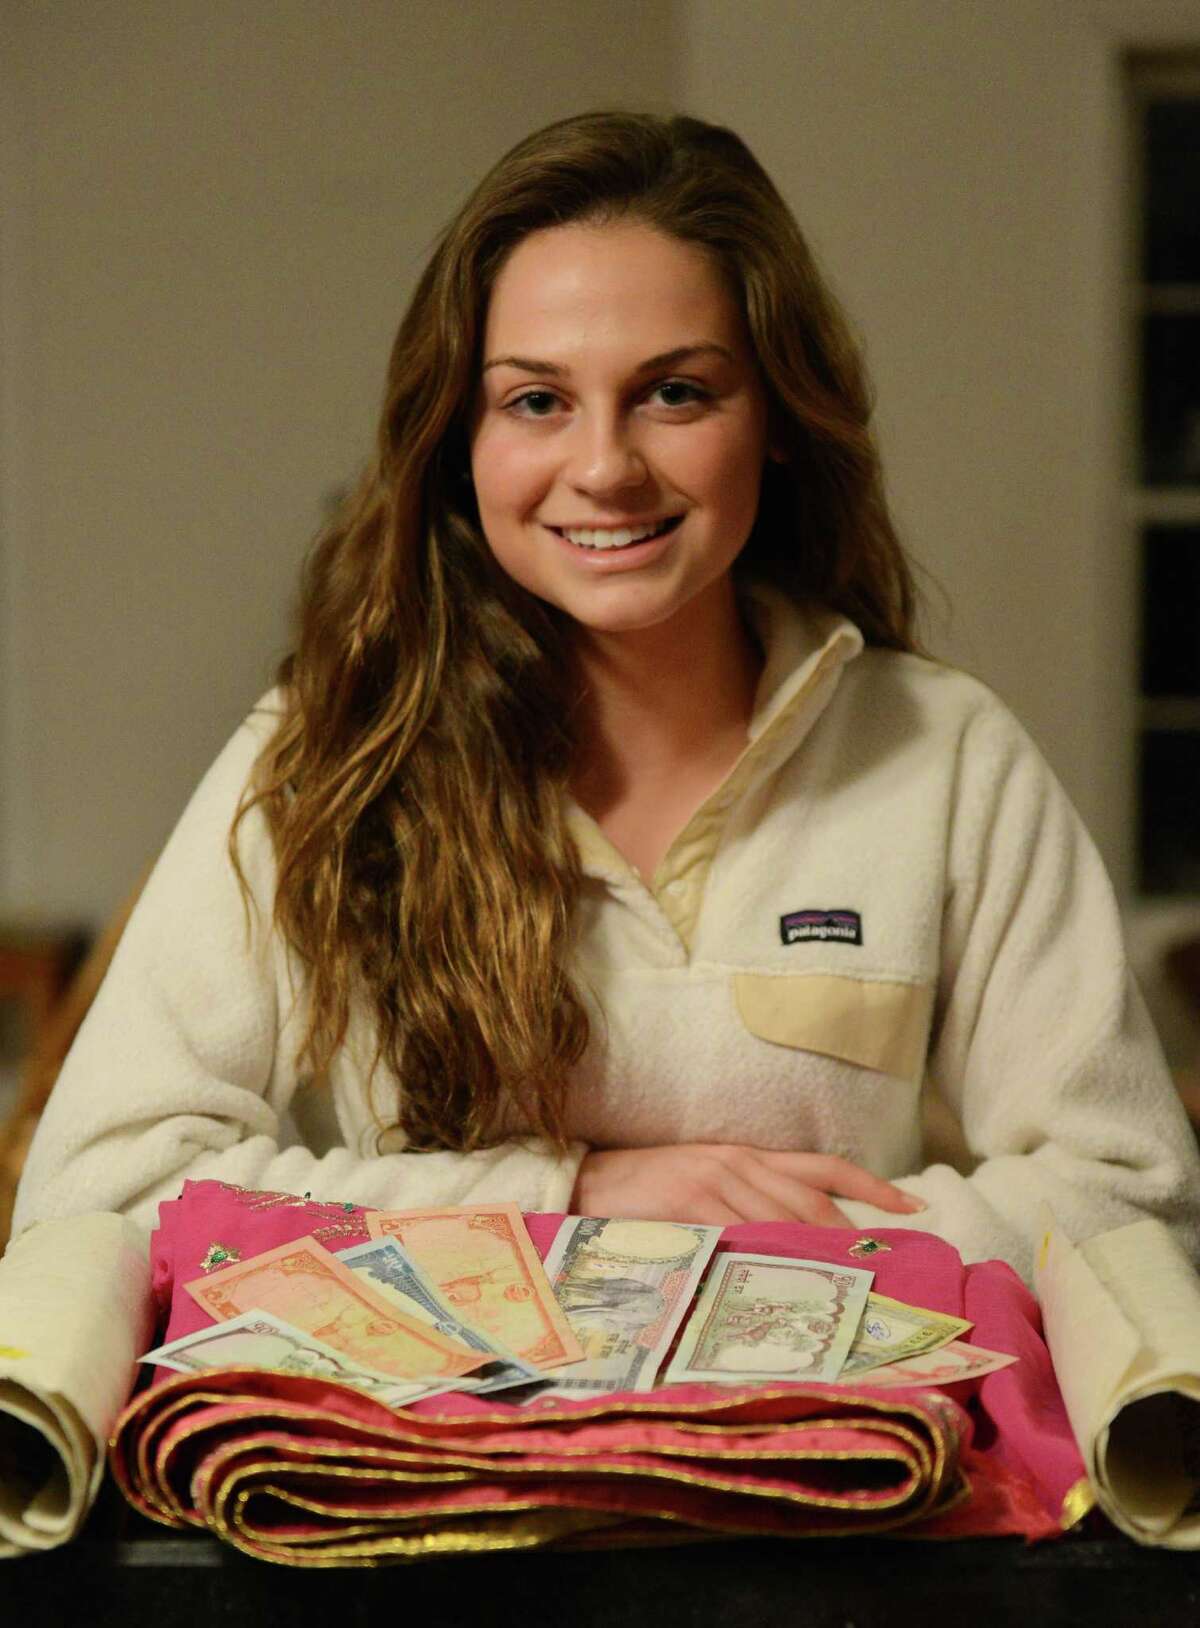 Taylor Weston, a senior at Shepaug Valley High School, poses with souvenirs from her recent trip to Nepal in her Bridgewater, Conn. home on Monday, Jan. 27, 2014. Weston was in Nepal from Dec. 7 through Dec. 17 for an exploratory project through Doctors Without Borders to investigate and compare the medical facilities in Nepal to those in the United States. For her senior project, "Exploring Medicine in Nepal," Weston will discuss her findings.